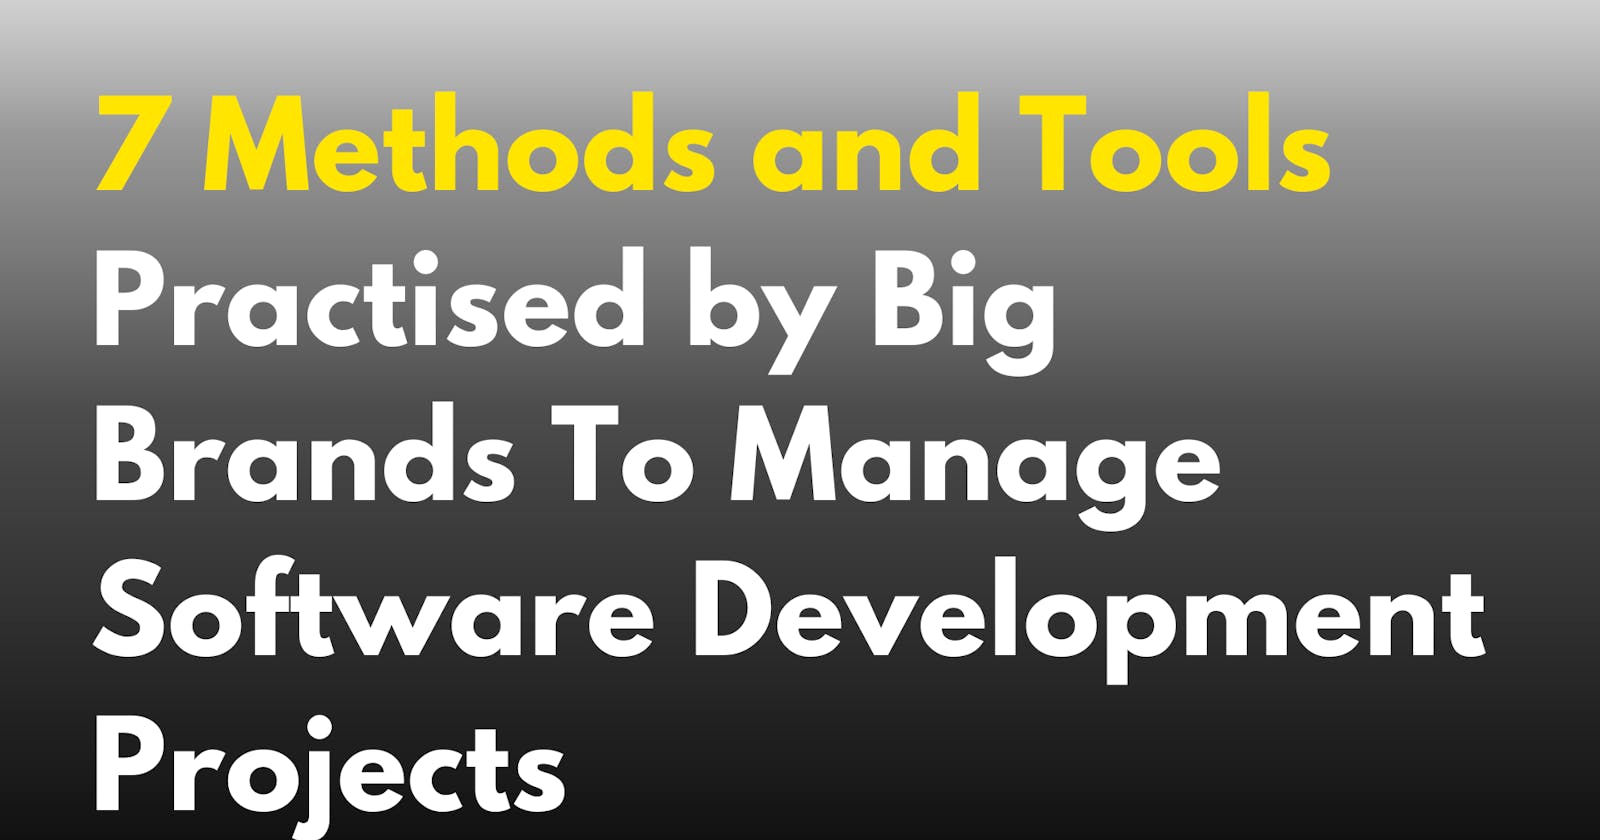 7 Methods and Tools Practised by Big Brands To Manage Their Software Development Projects 🚀